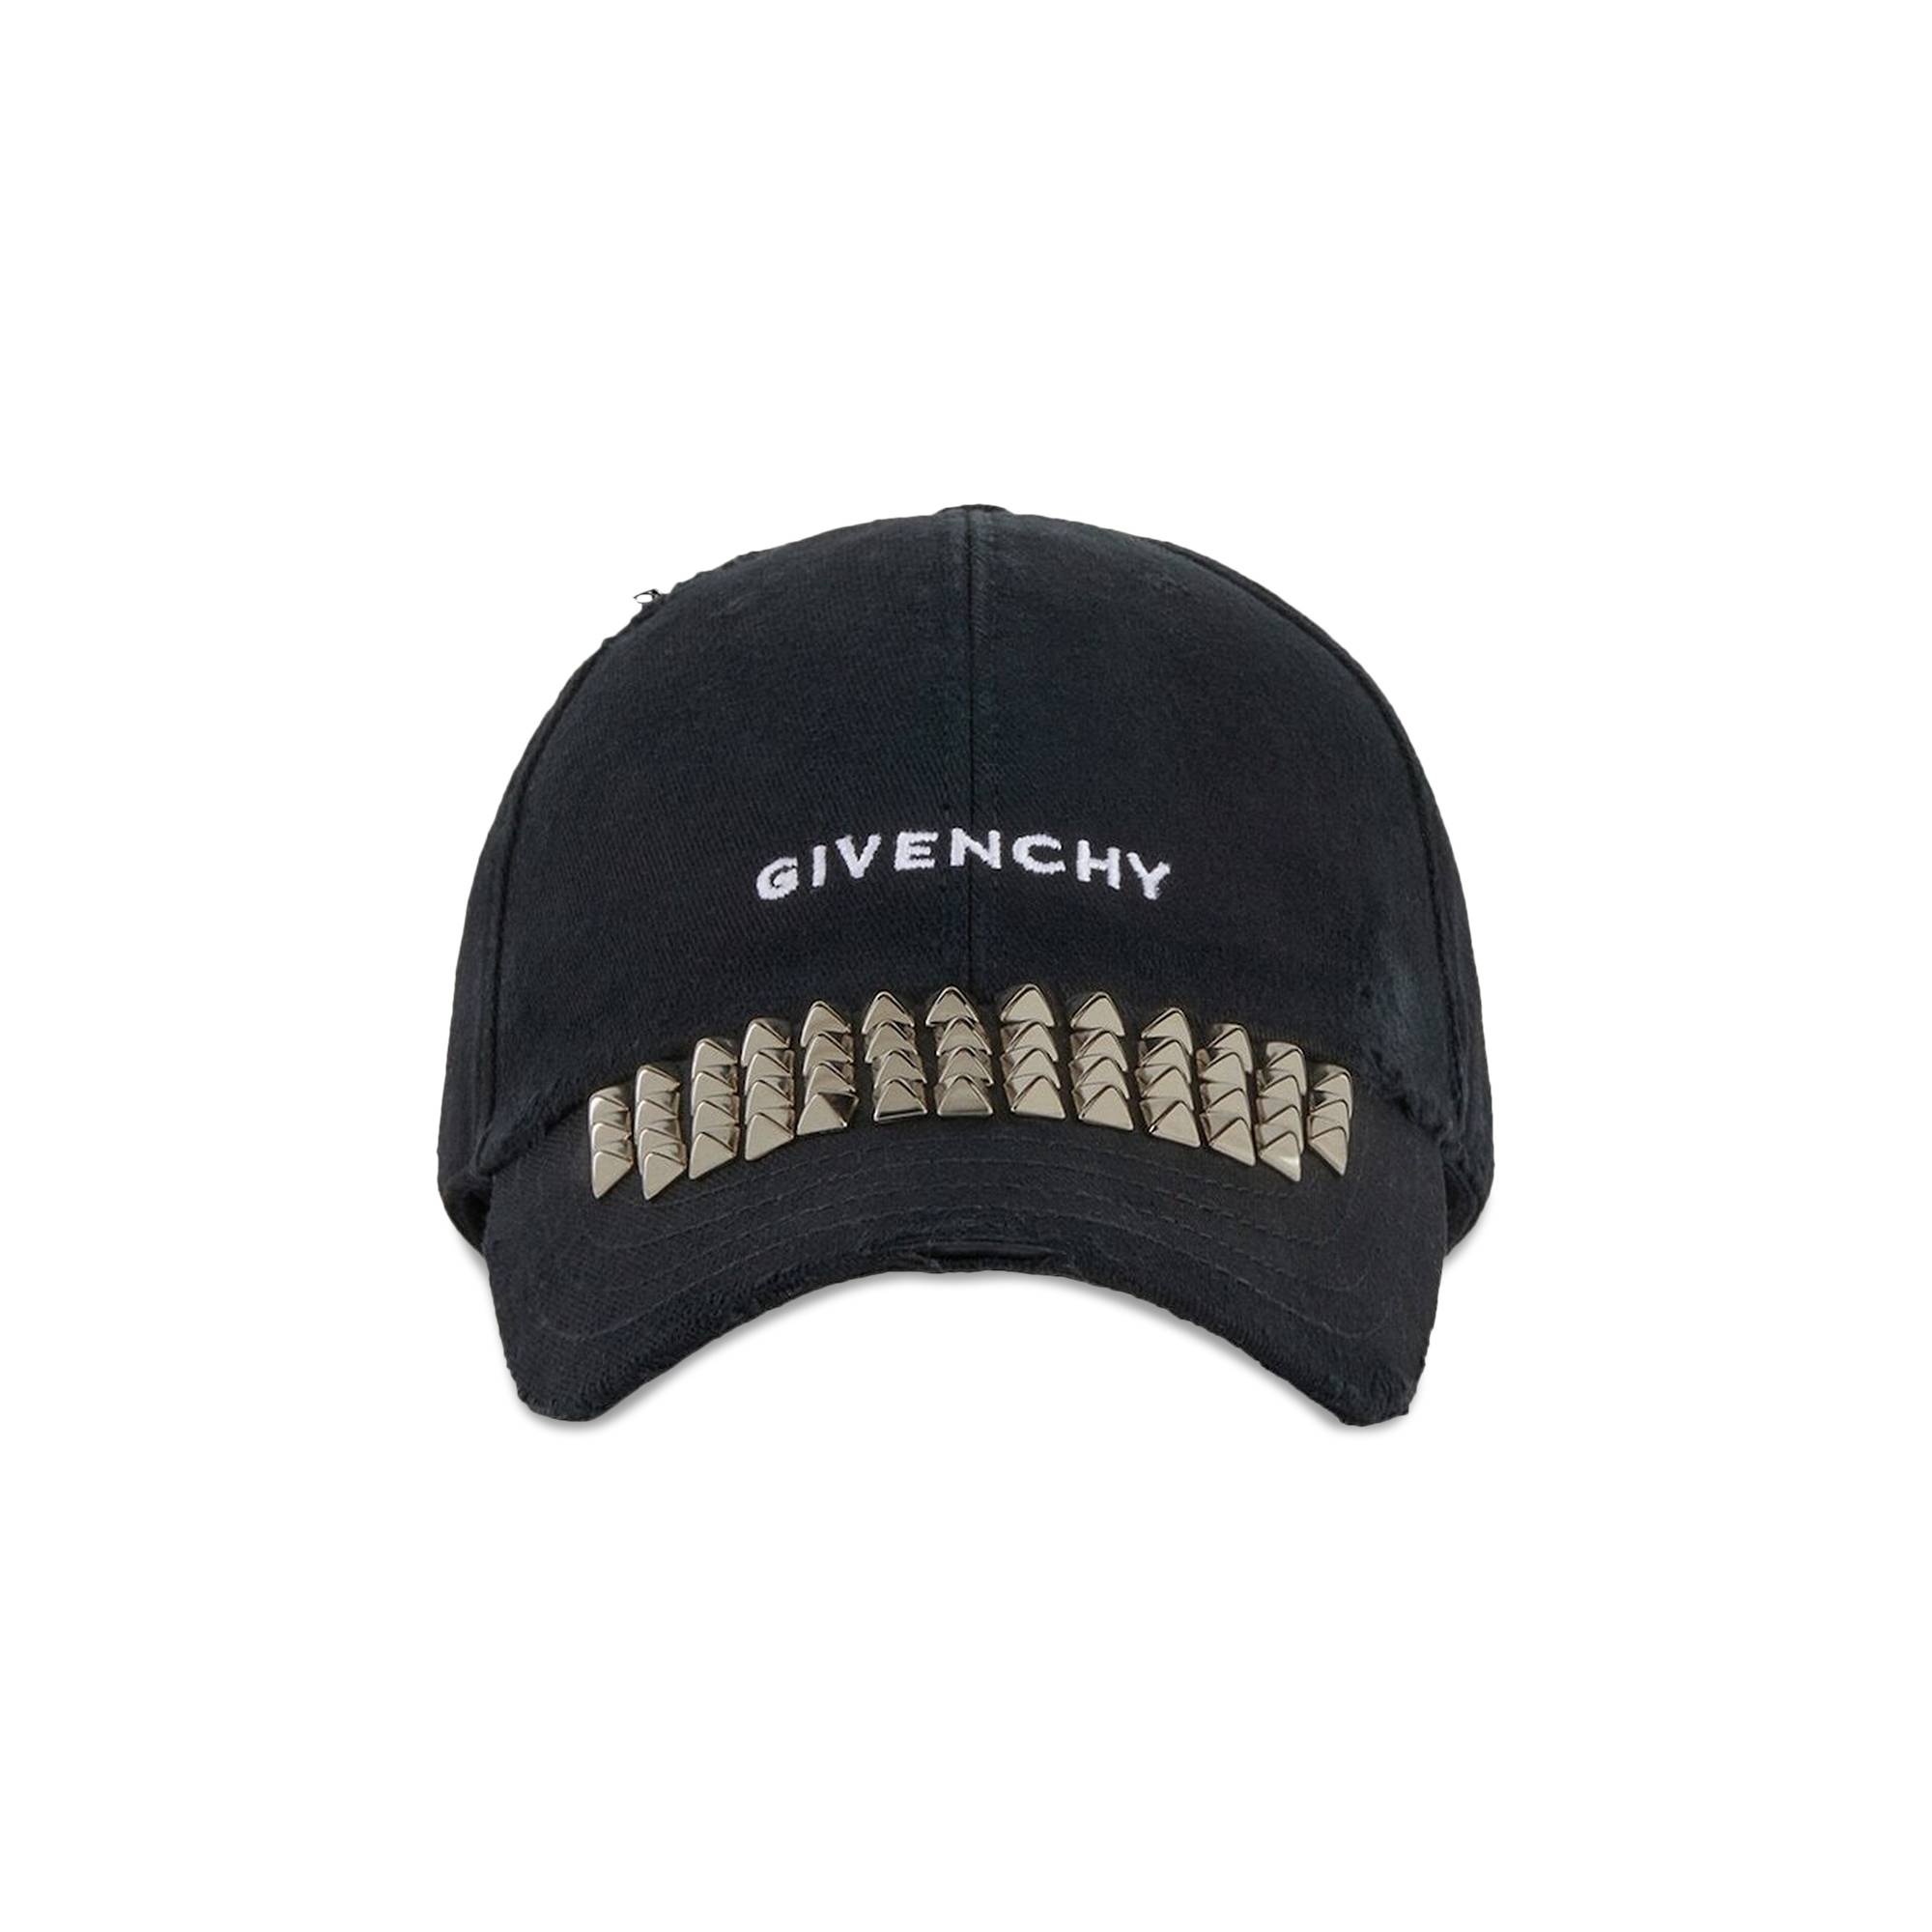 Givenchy Embroidered Logo Curved Cap 'Black' - 1